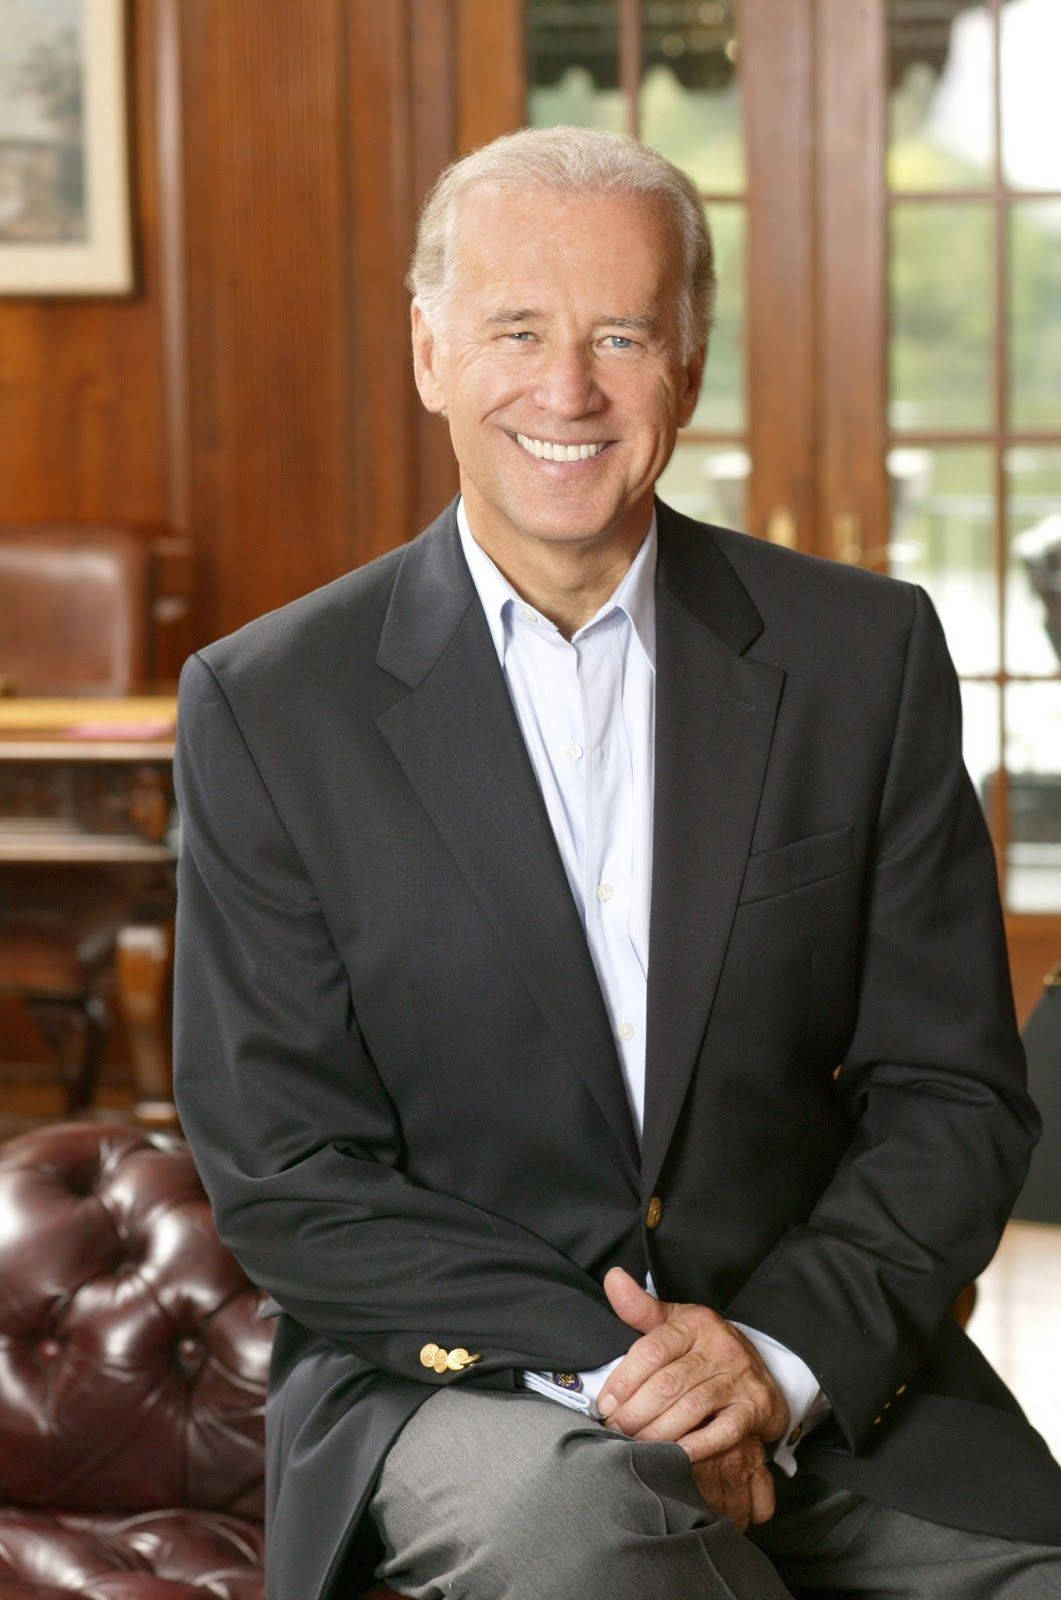 Joe Biden, Smiling During His 2020 Campaign Background